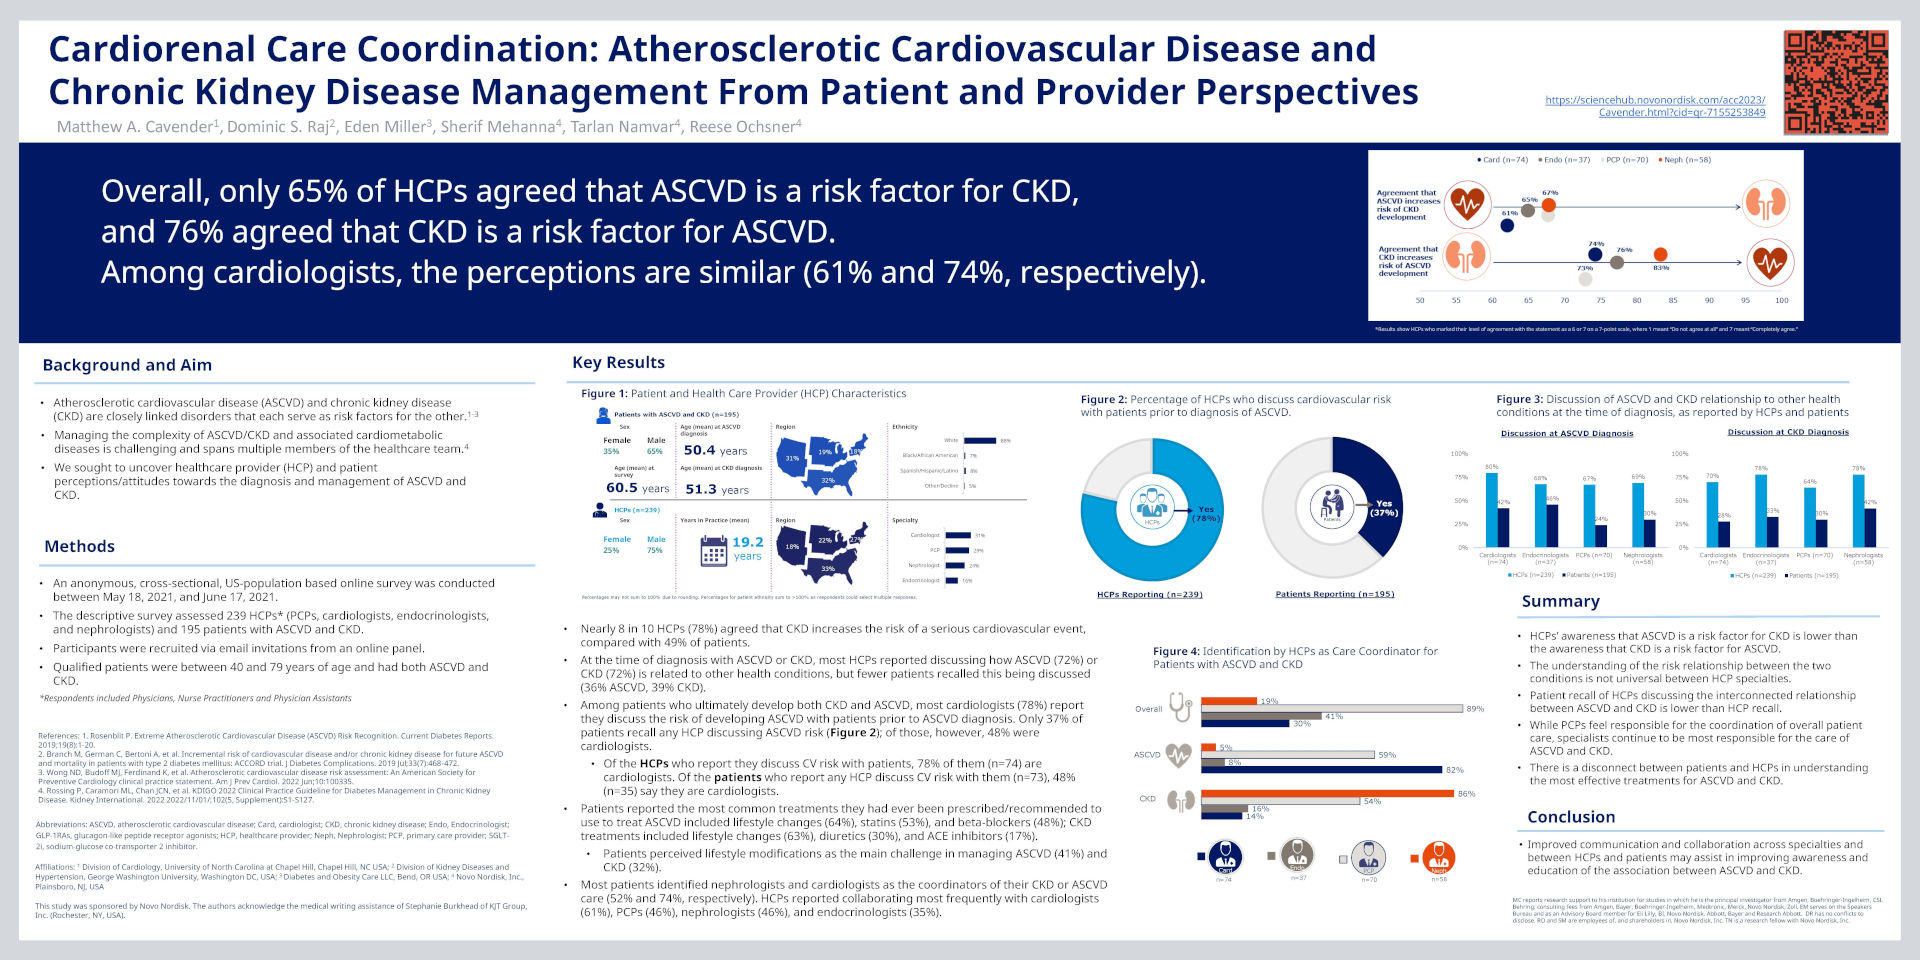 Cardiorenal Care Coordination: Atherosclerotic Cardiovascular Disease and Chronic Kidney Disease Management From Patient and Provider Perspectives - poster